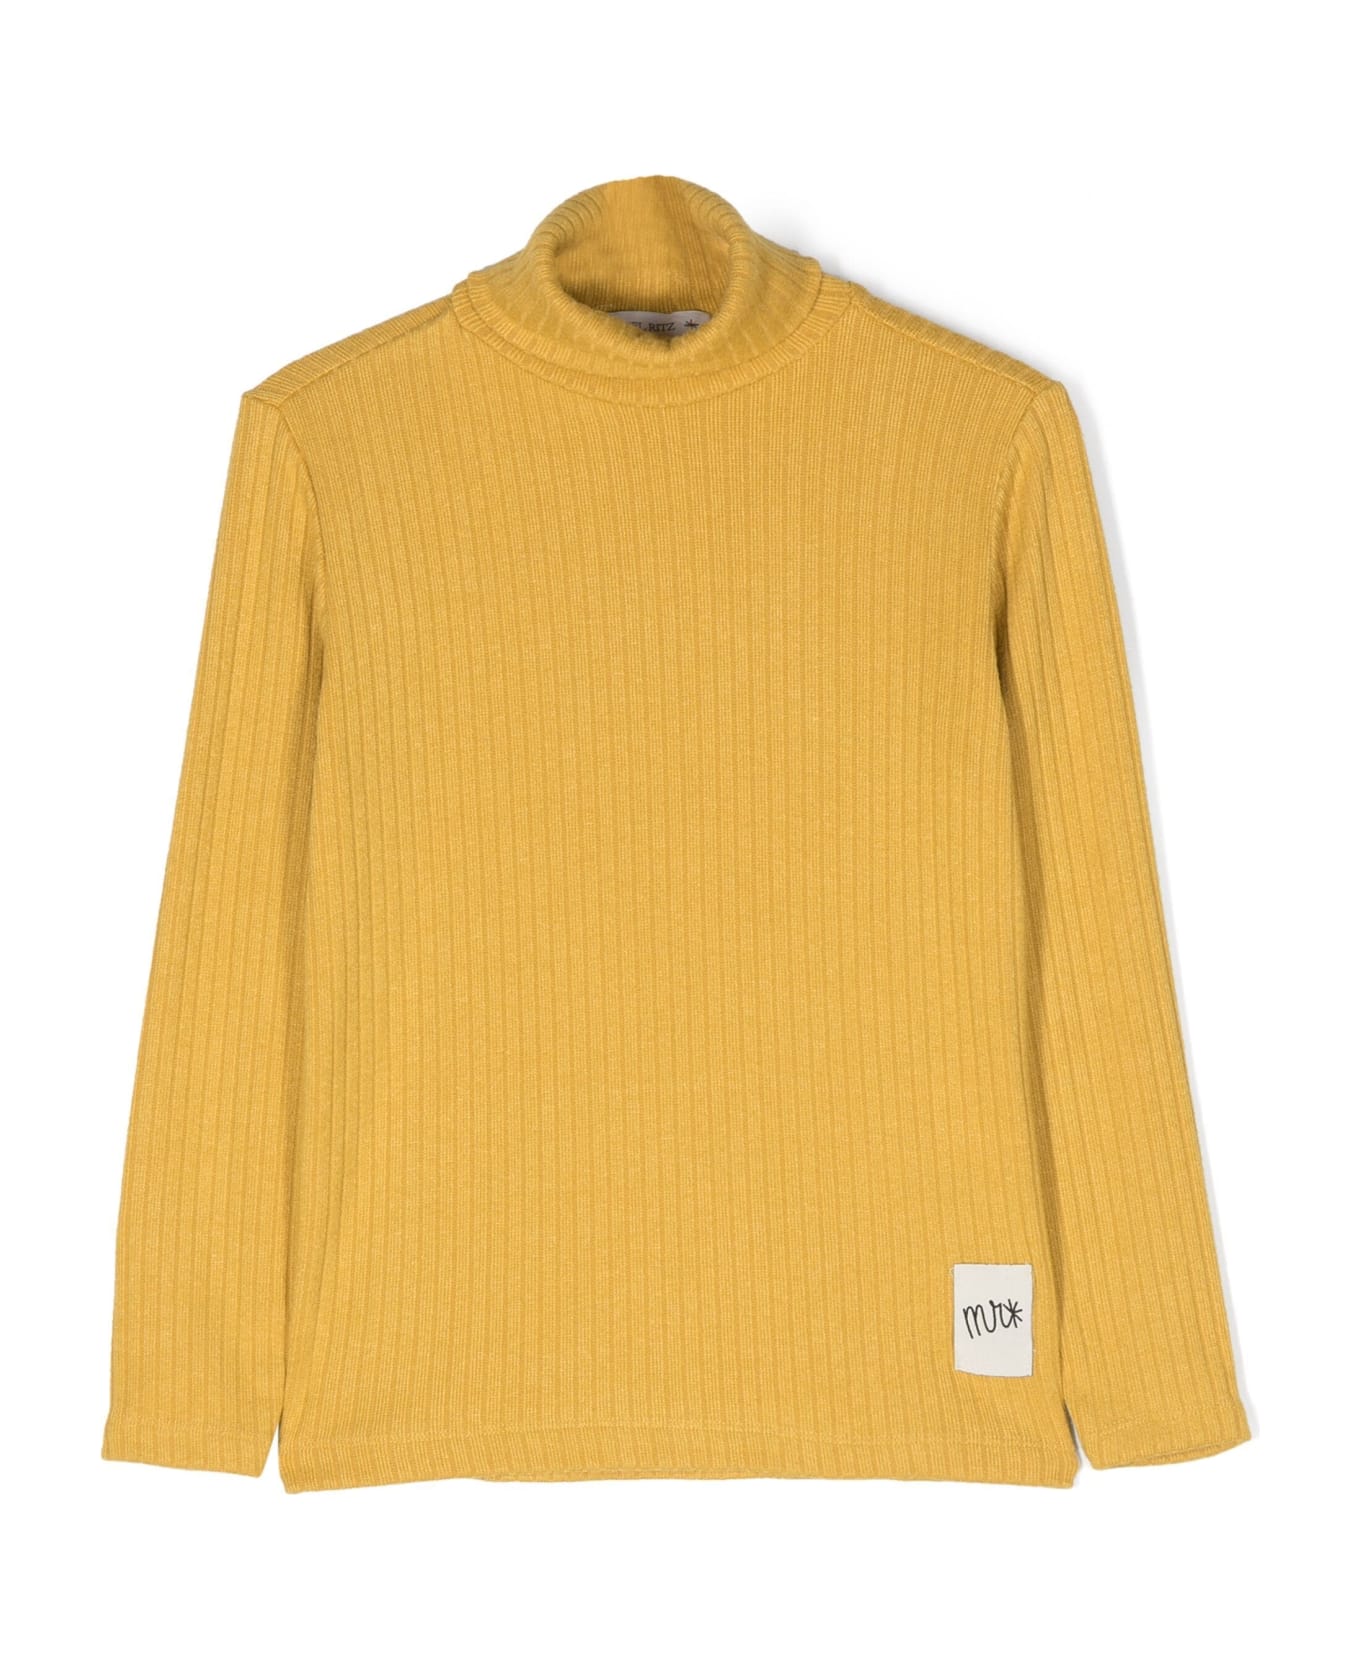 Manuel Ritz Turtleneck Sweater With Patch - Yellow